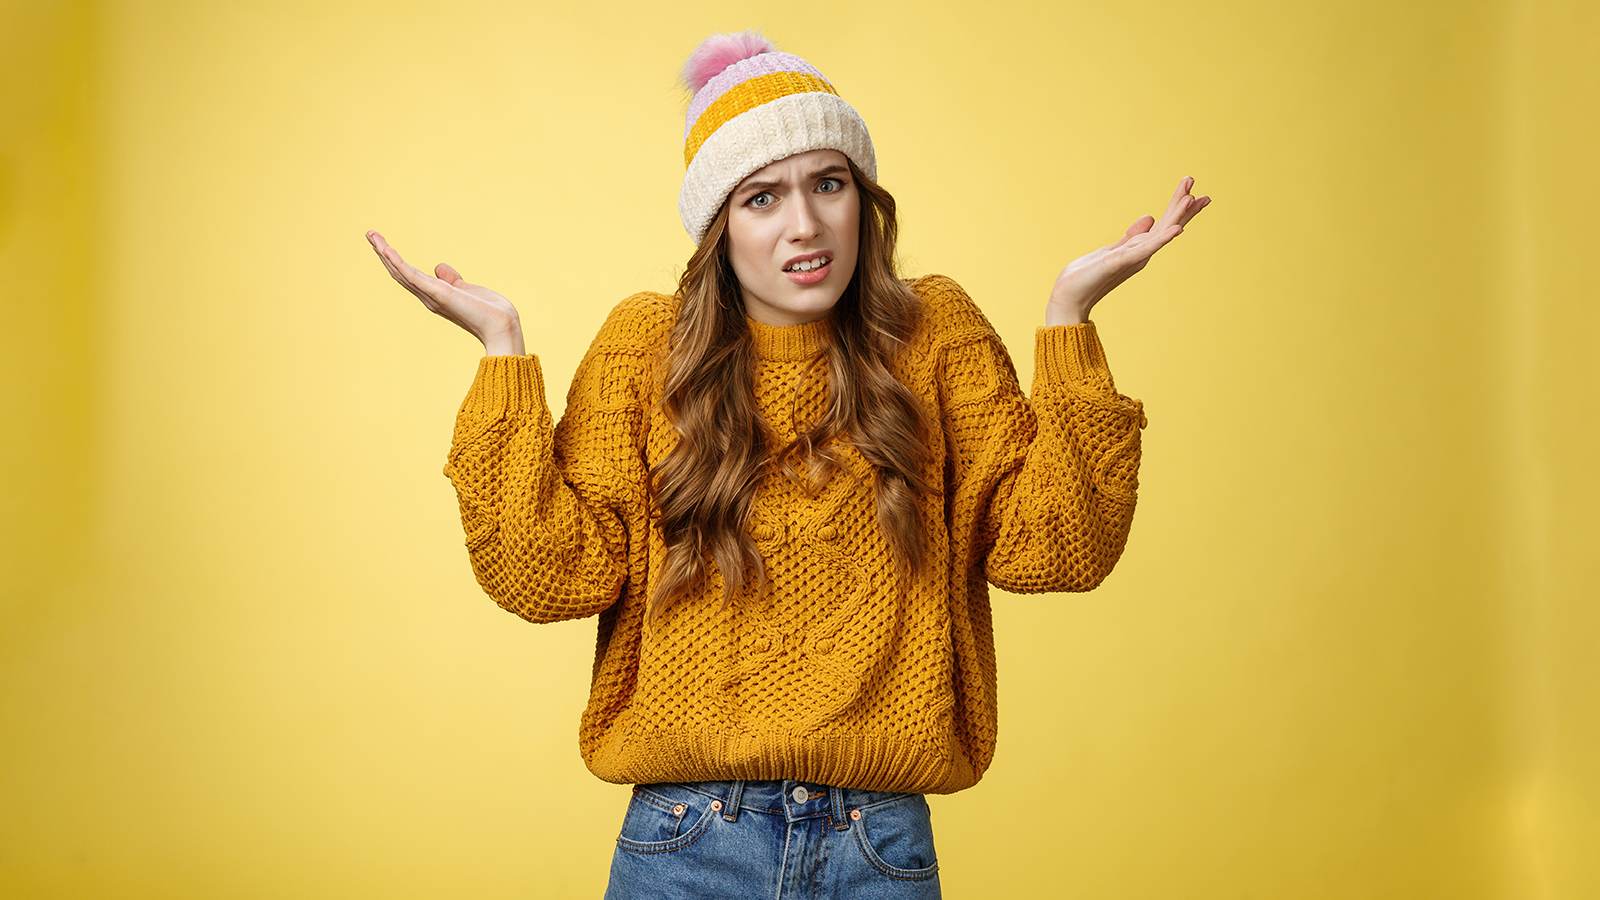 What fuss about. Annoyed confused intense perplexed young attractive woman wearing sweater hat raising hands dismay shrugging cringing grimacing frustrated arguing clueless what happened